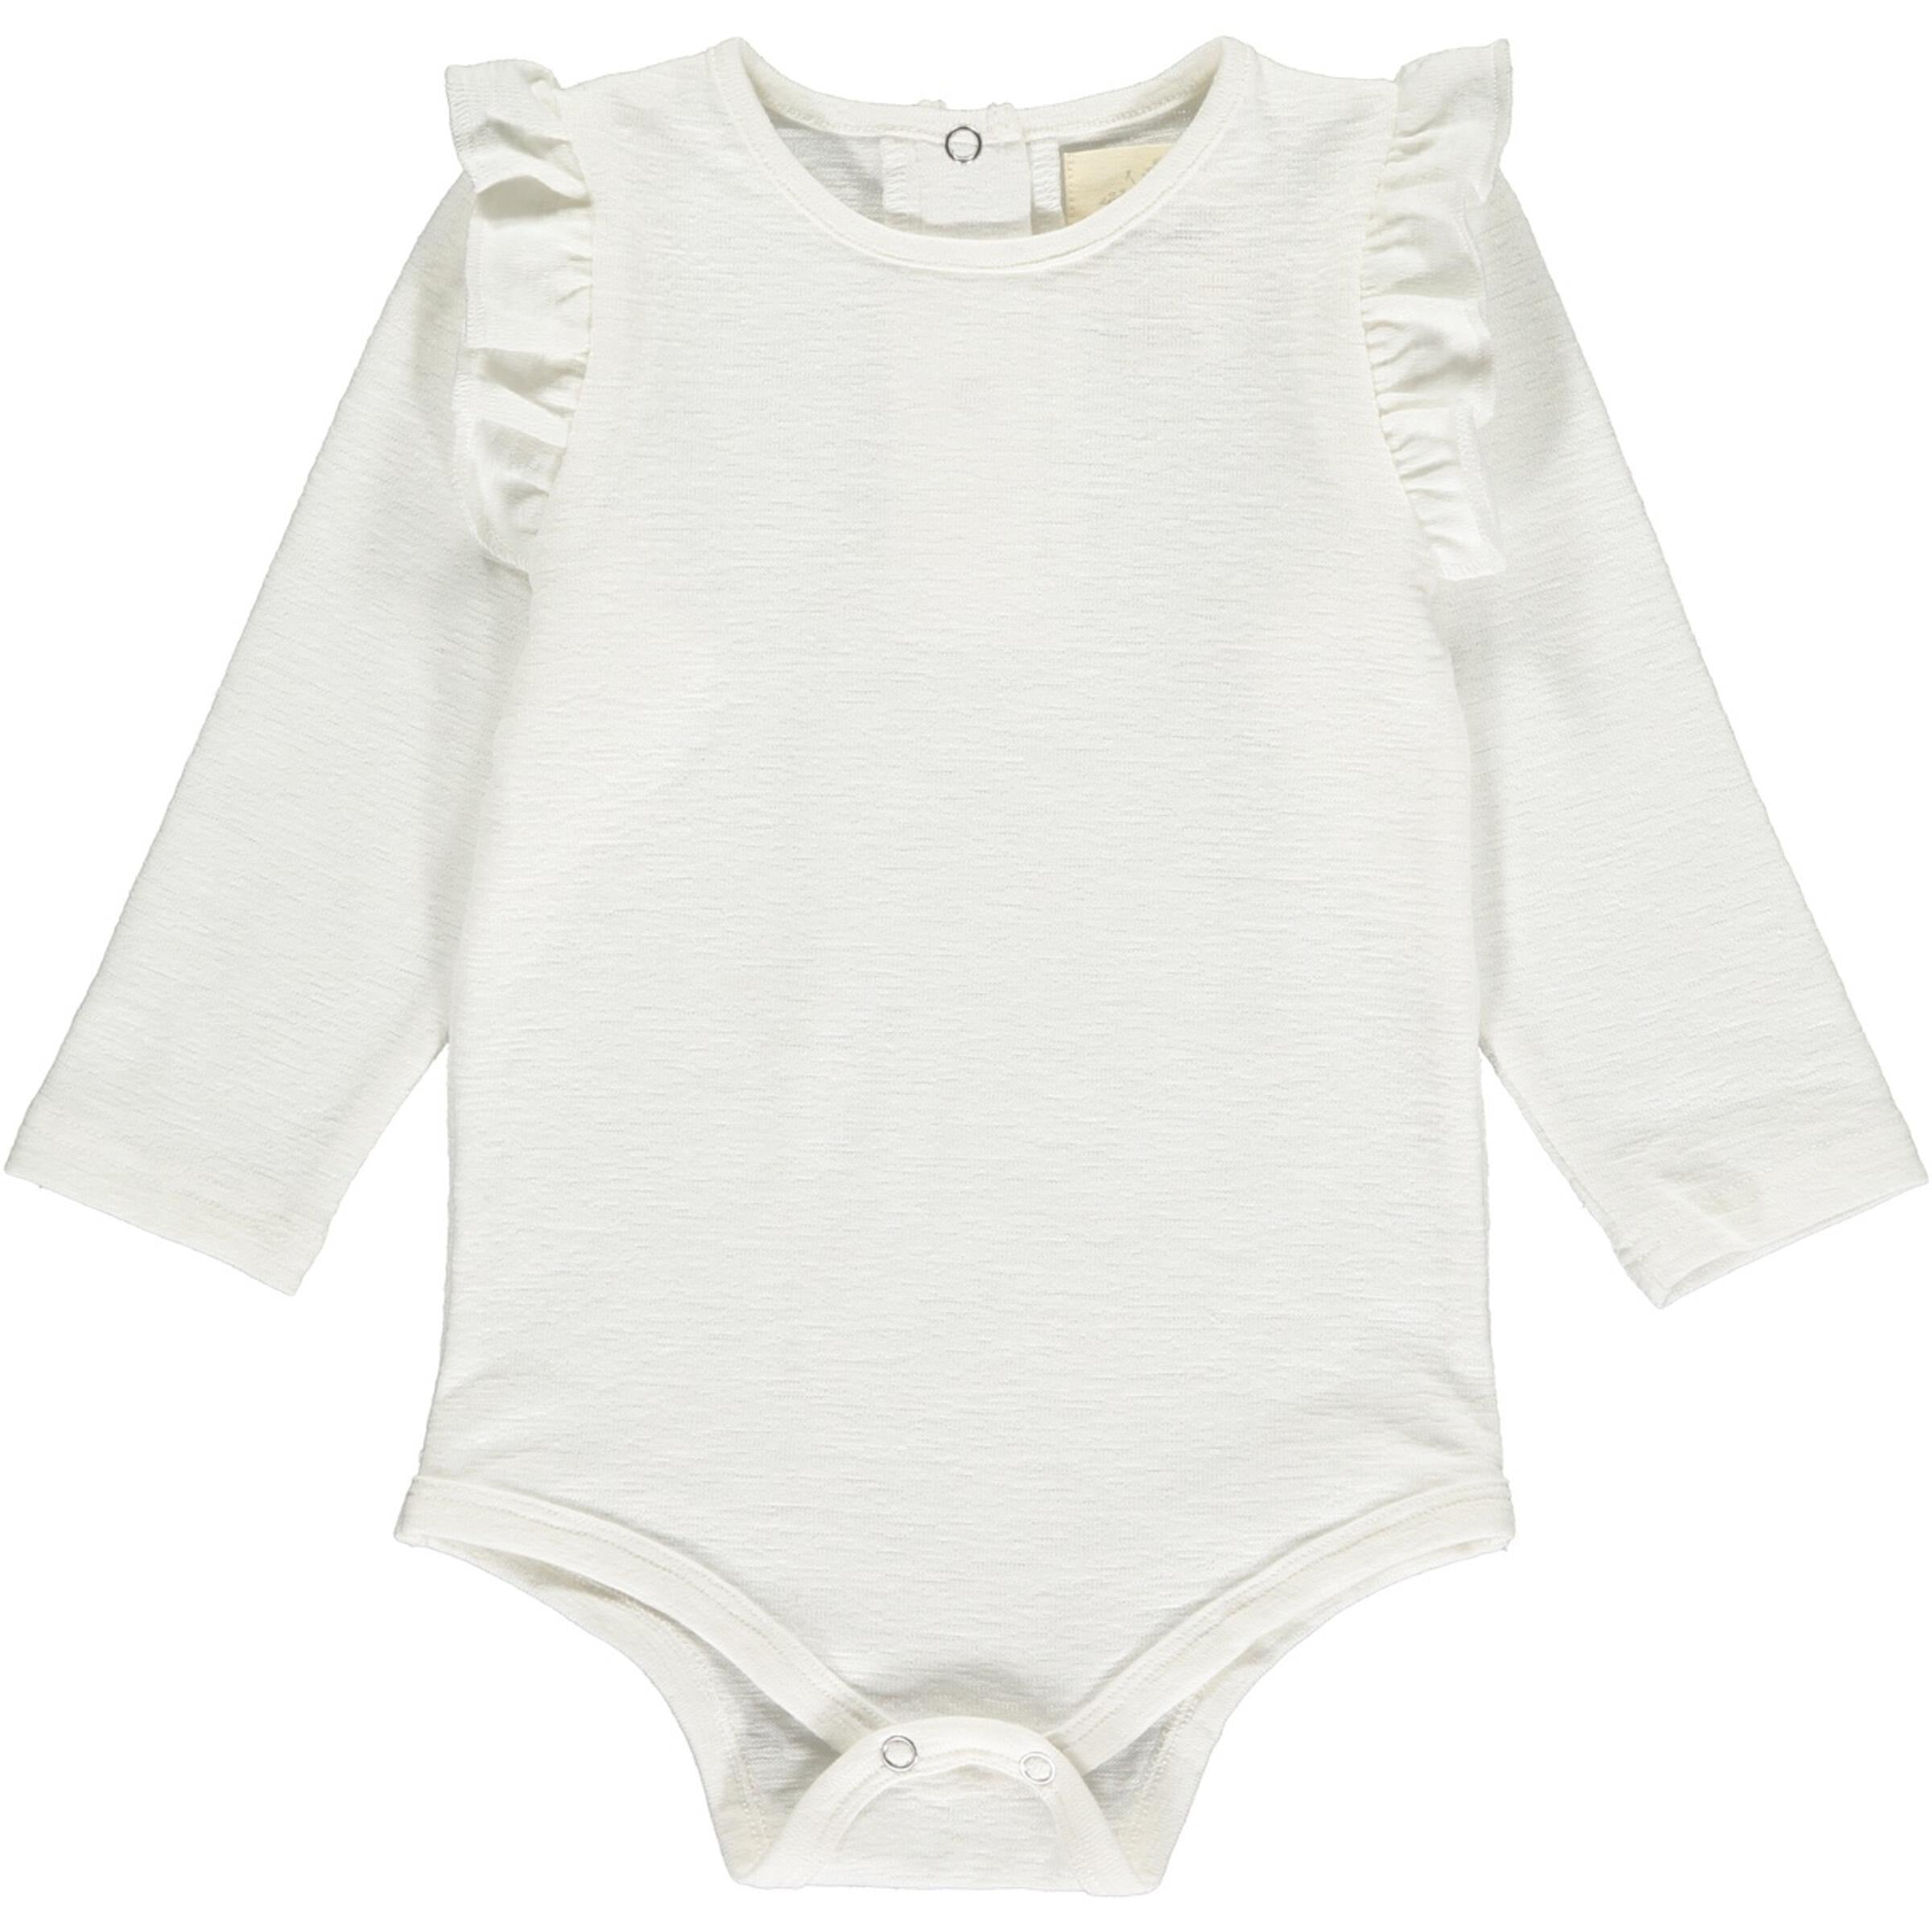 long sleeve ivory colored onesie with ruffled sleeve